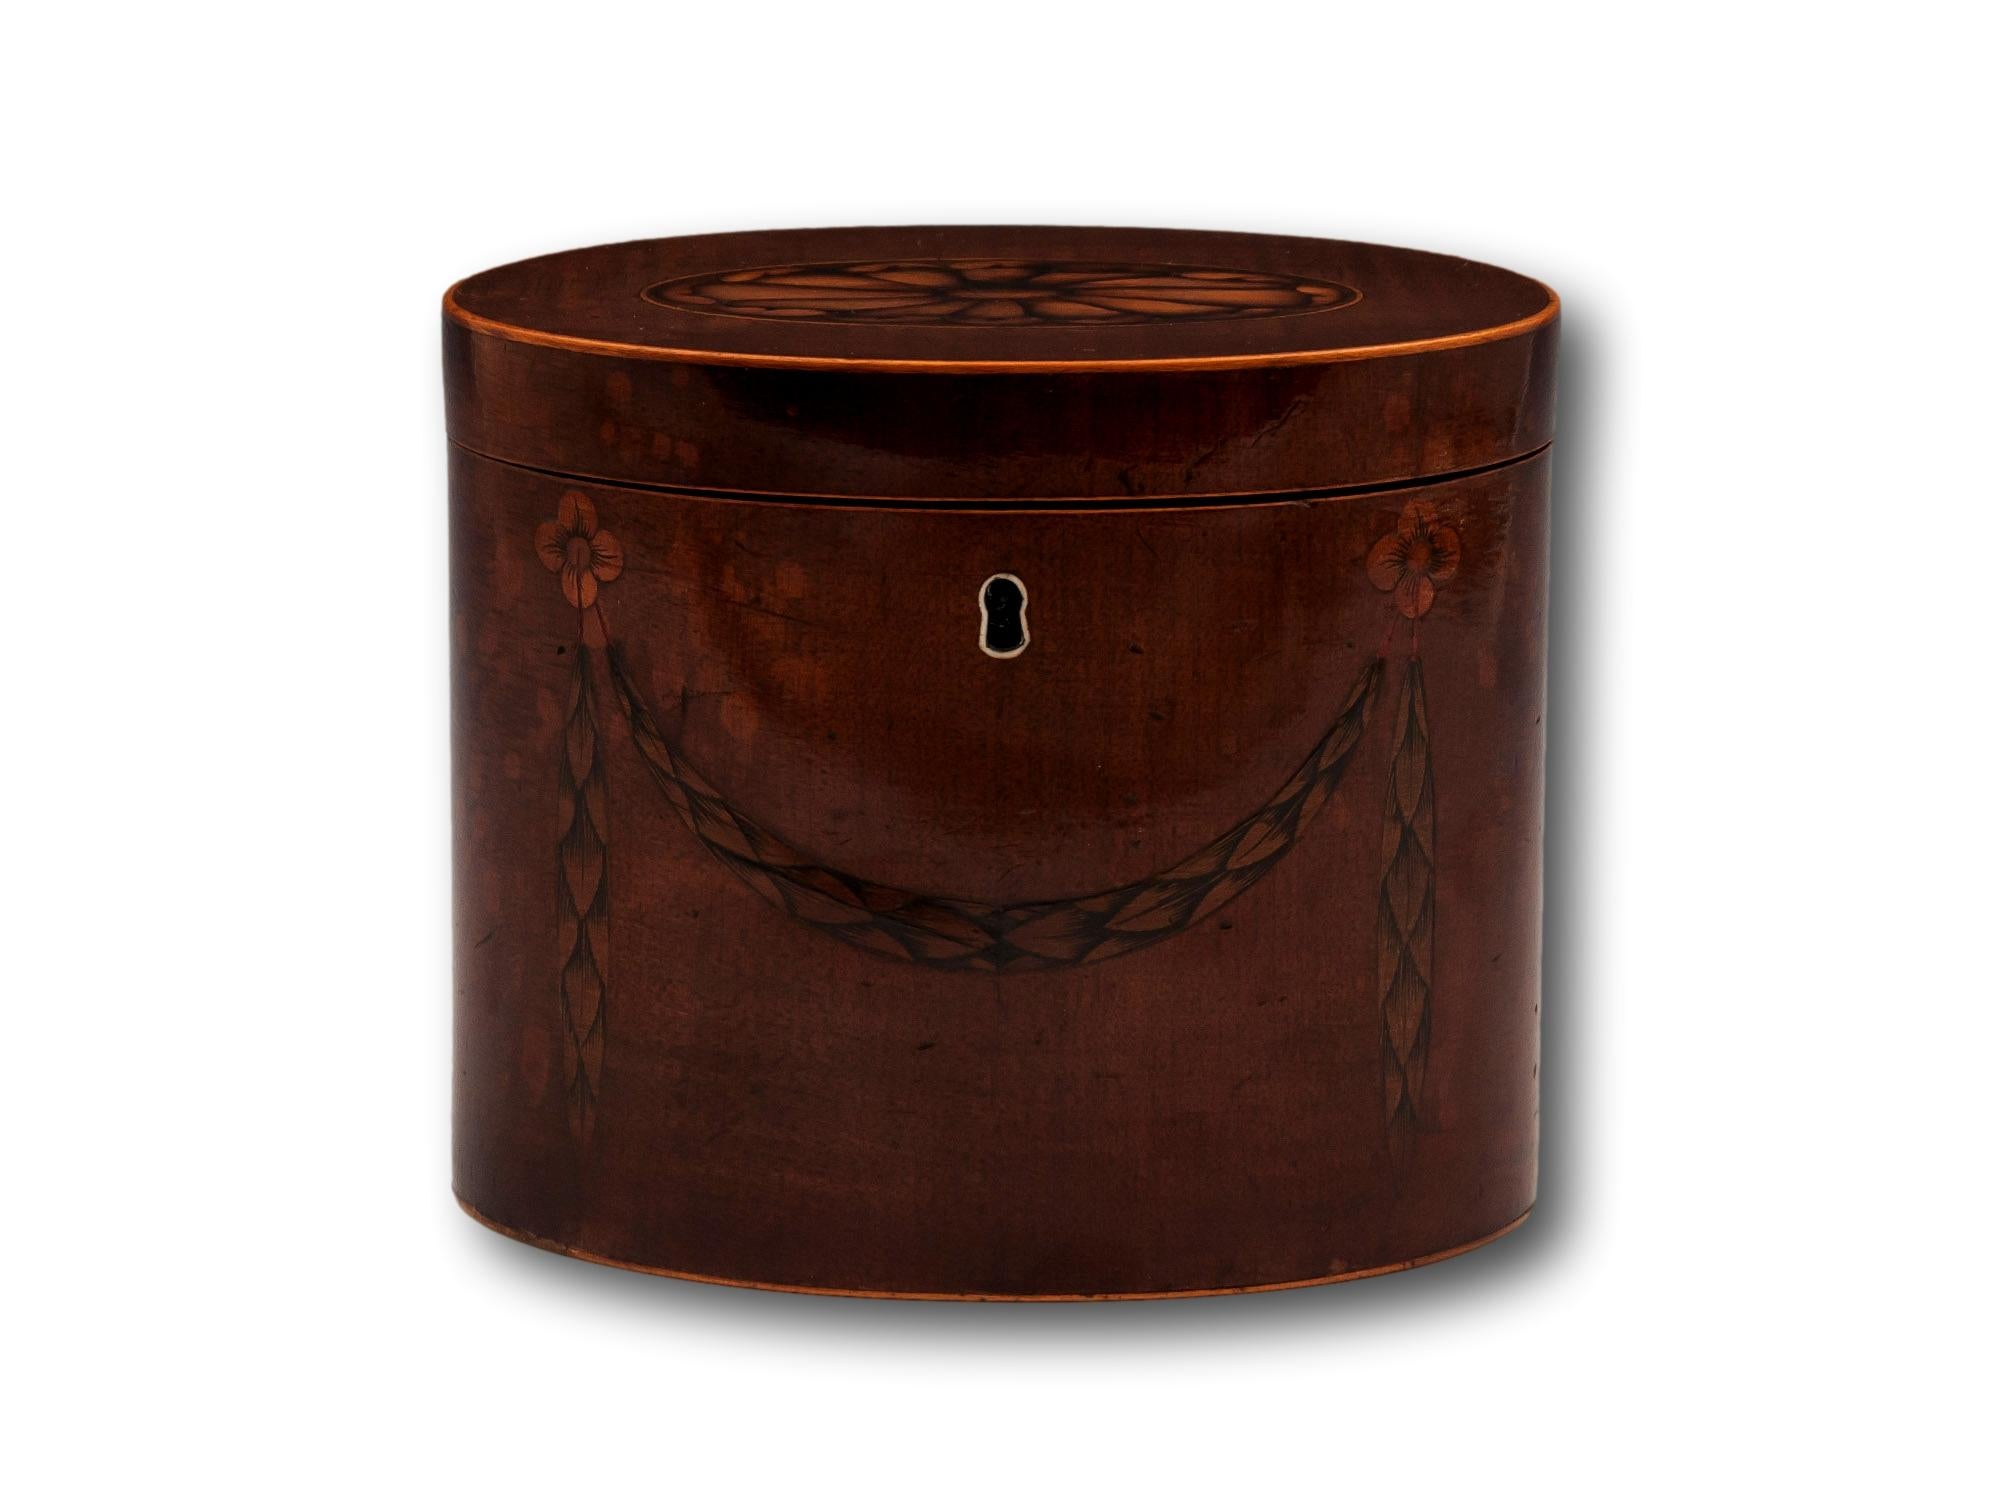 From our Tea Caddy collection, we are delighted to offer this Georgian Oval Tea Caddy. The Tea Caddy of elongated Oval form veneered in Harewood with Boxwood stringing to the lid around the perimeter. The front of the Tea Caddy features a tied husk